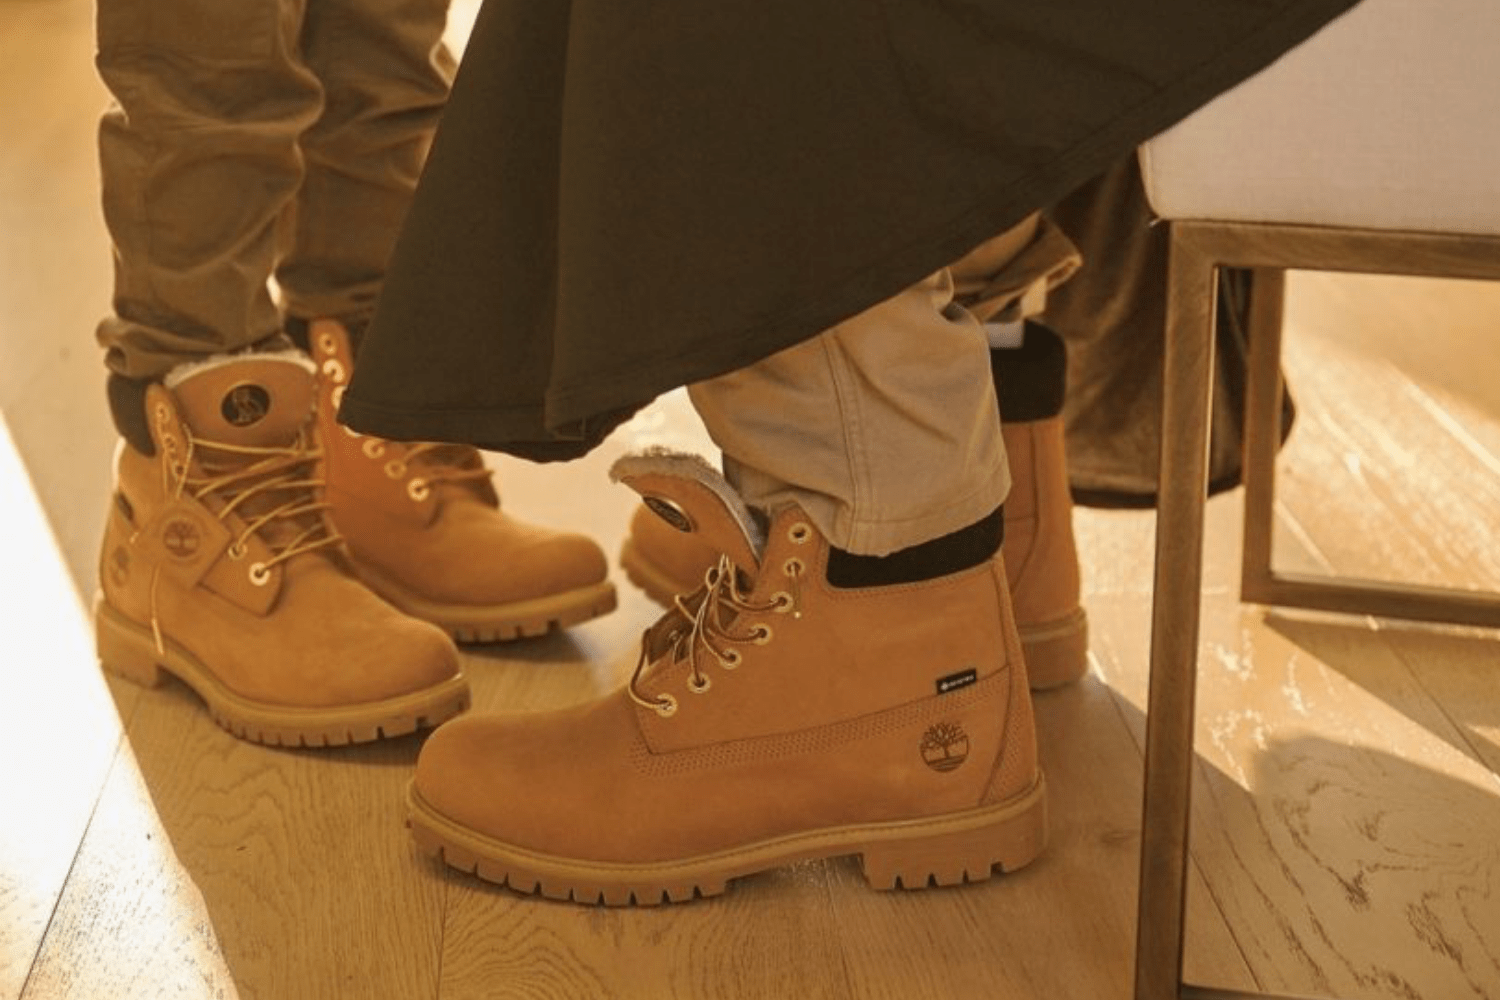 Popular Timberland boots and sneakers for the cold season